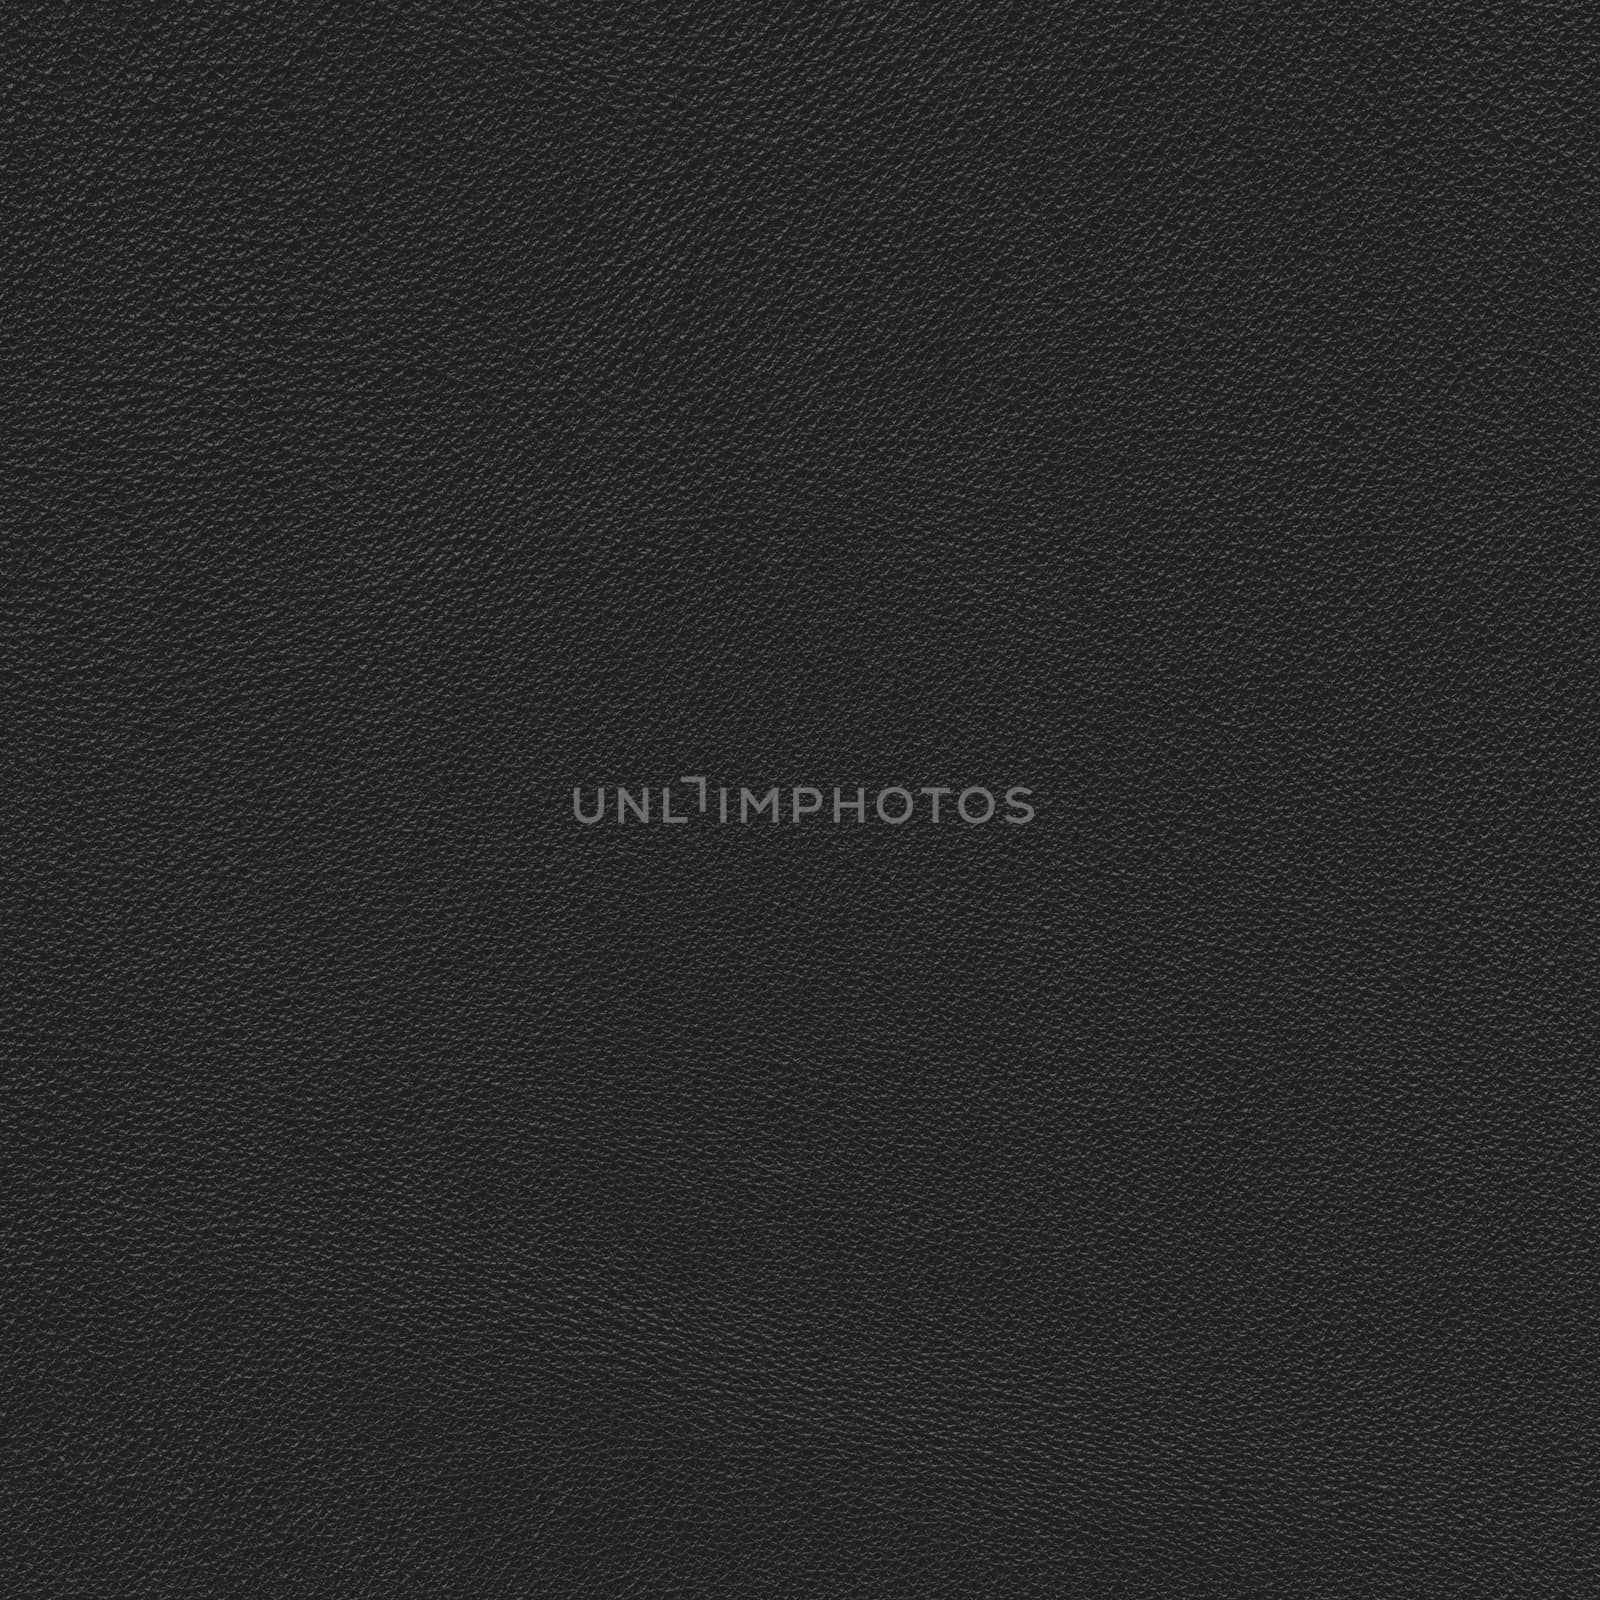 Real close-up of black leather background texture